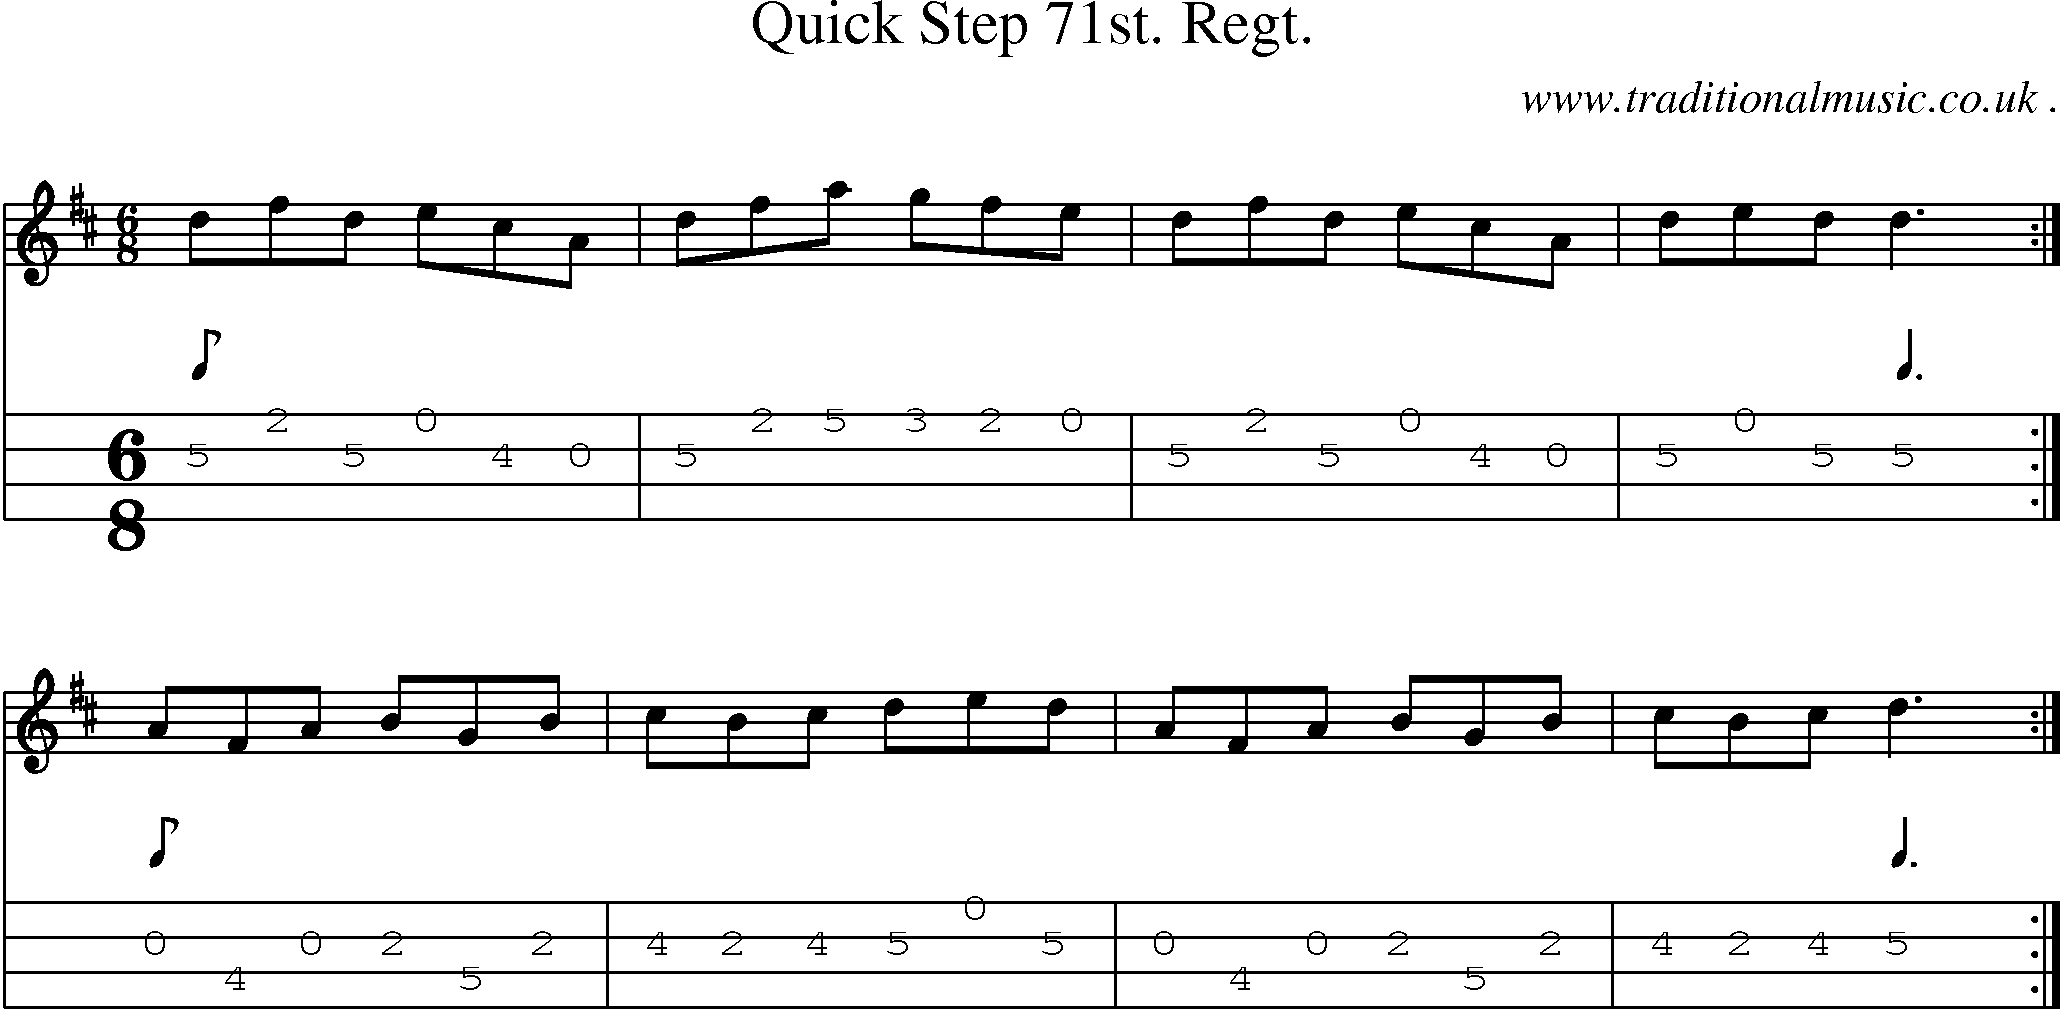 Sheet-music  score, Chords and Mandolin Tabs for Quick Step 71st Regt